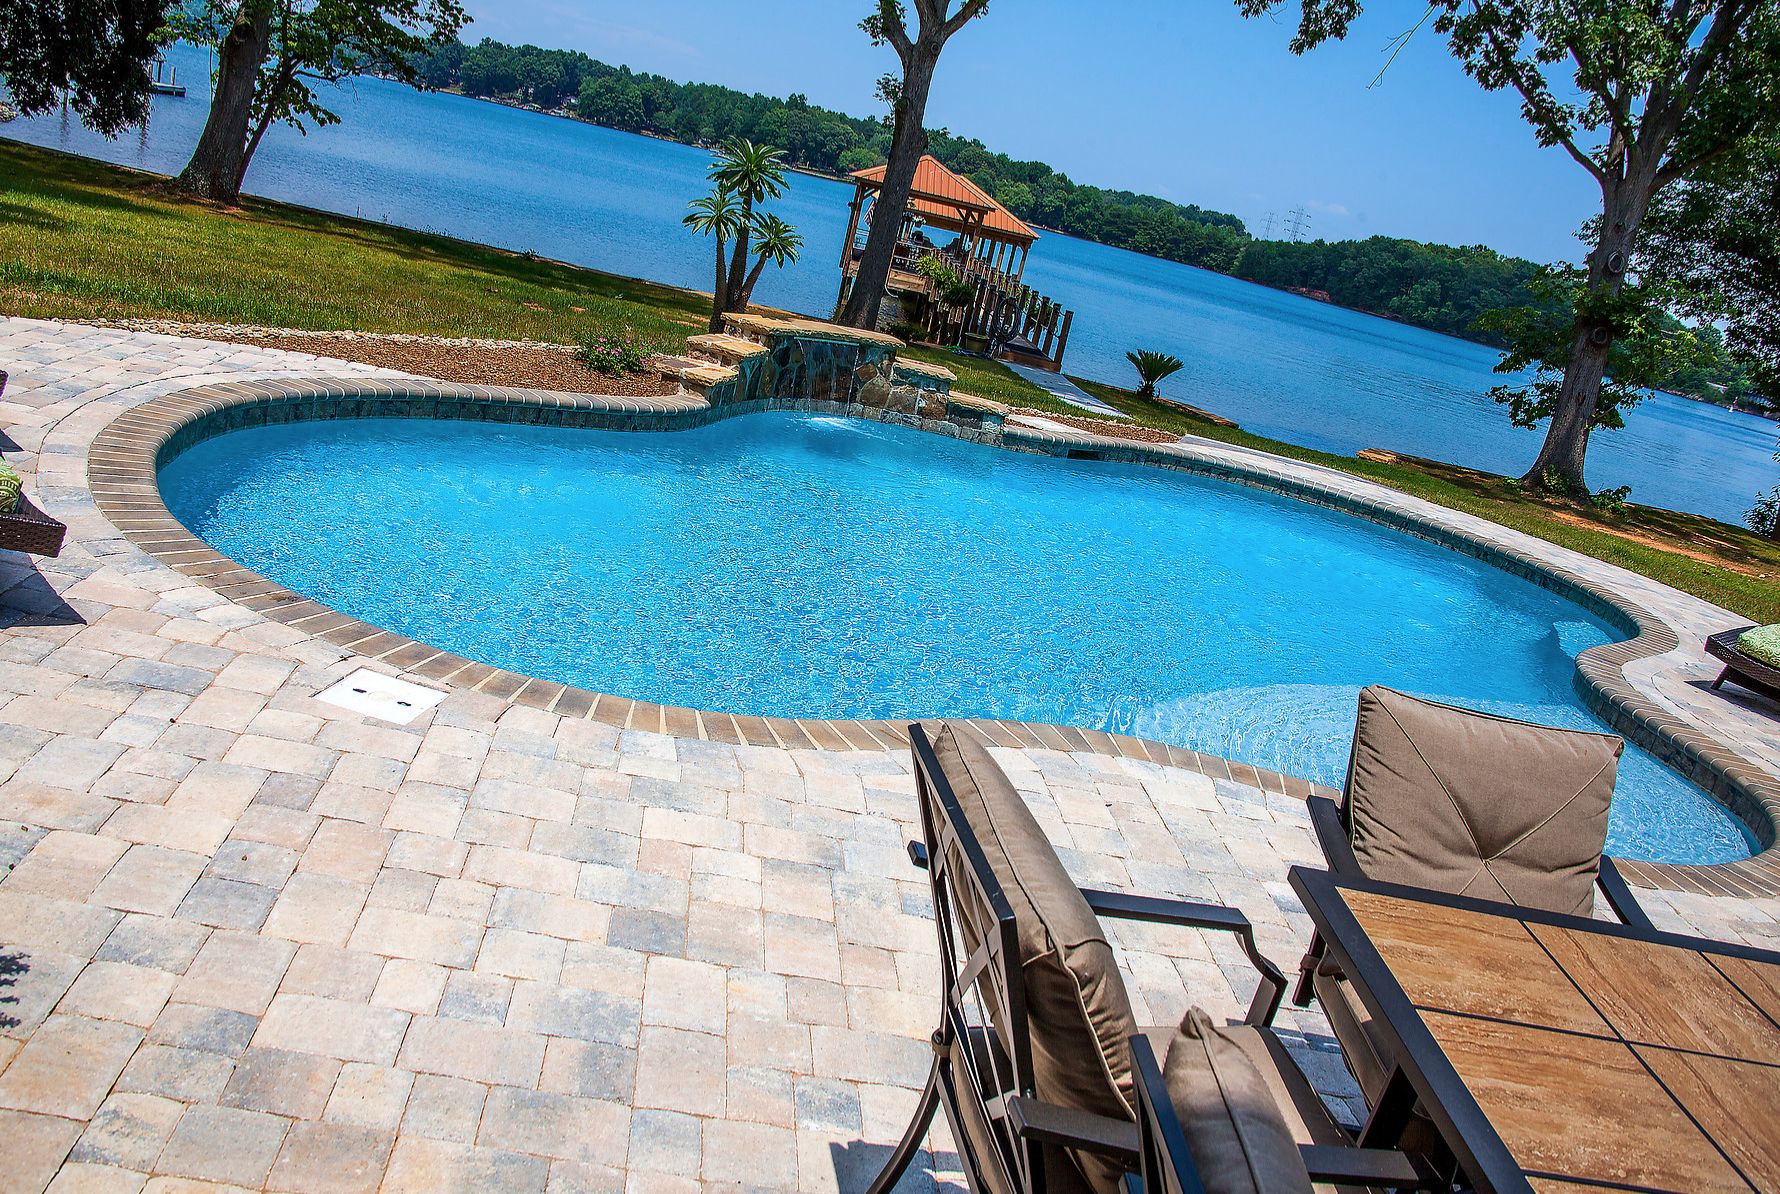 Design Your Luxury Gunite Pool in Waxhaw North Carolina with CPC pools Call us At 704-799-5236